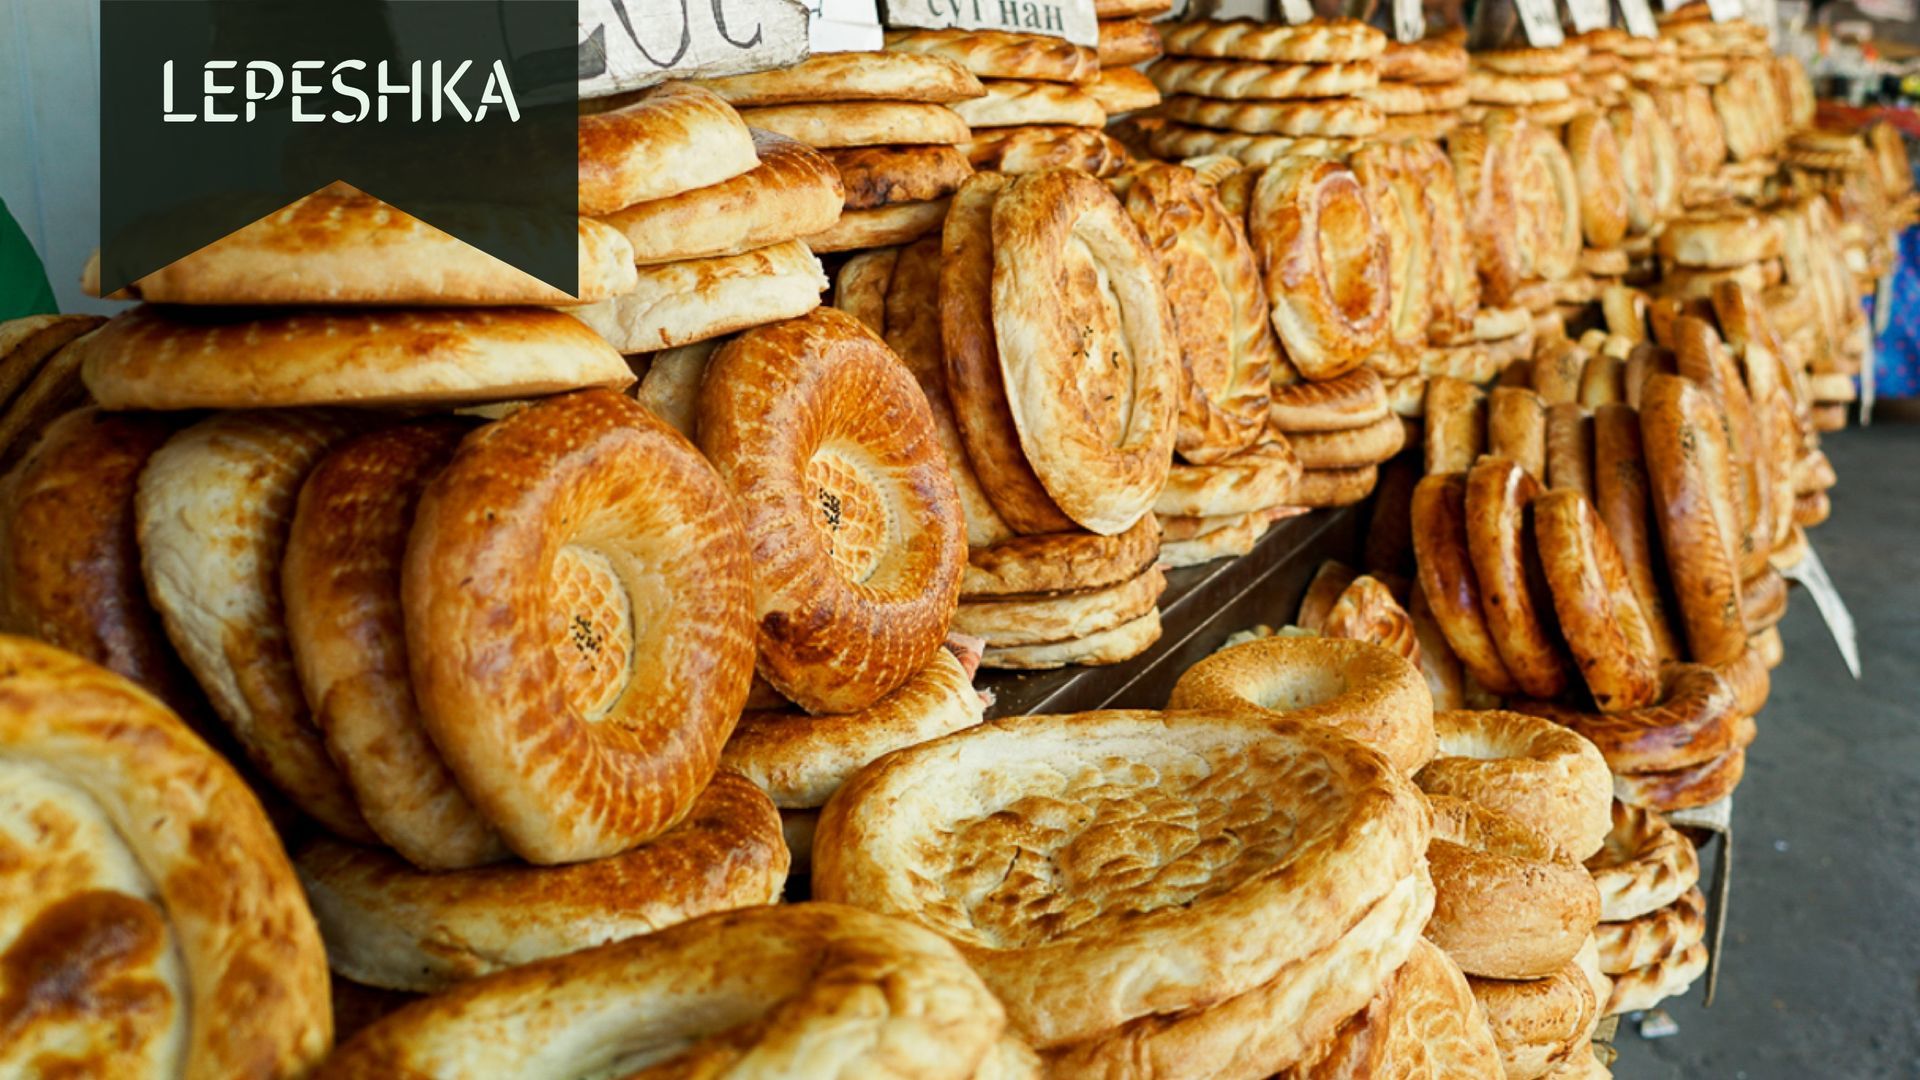 Lepeshka or Round Bread sold in bazaars of Central Asia